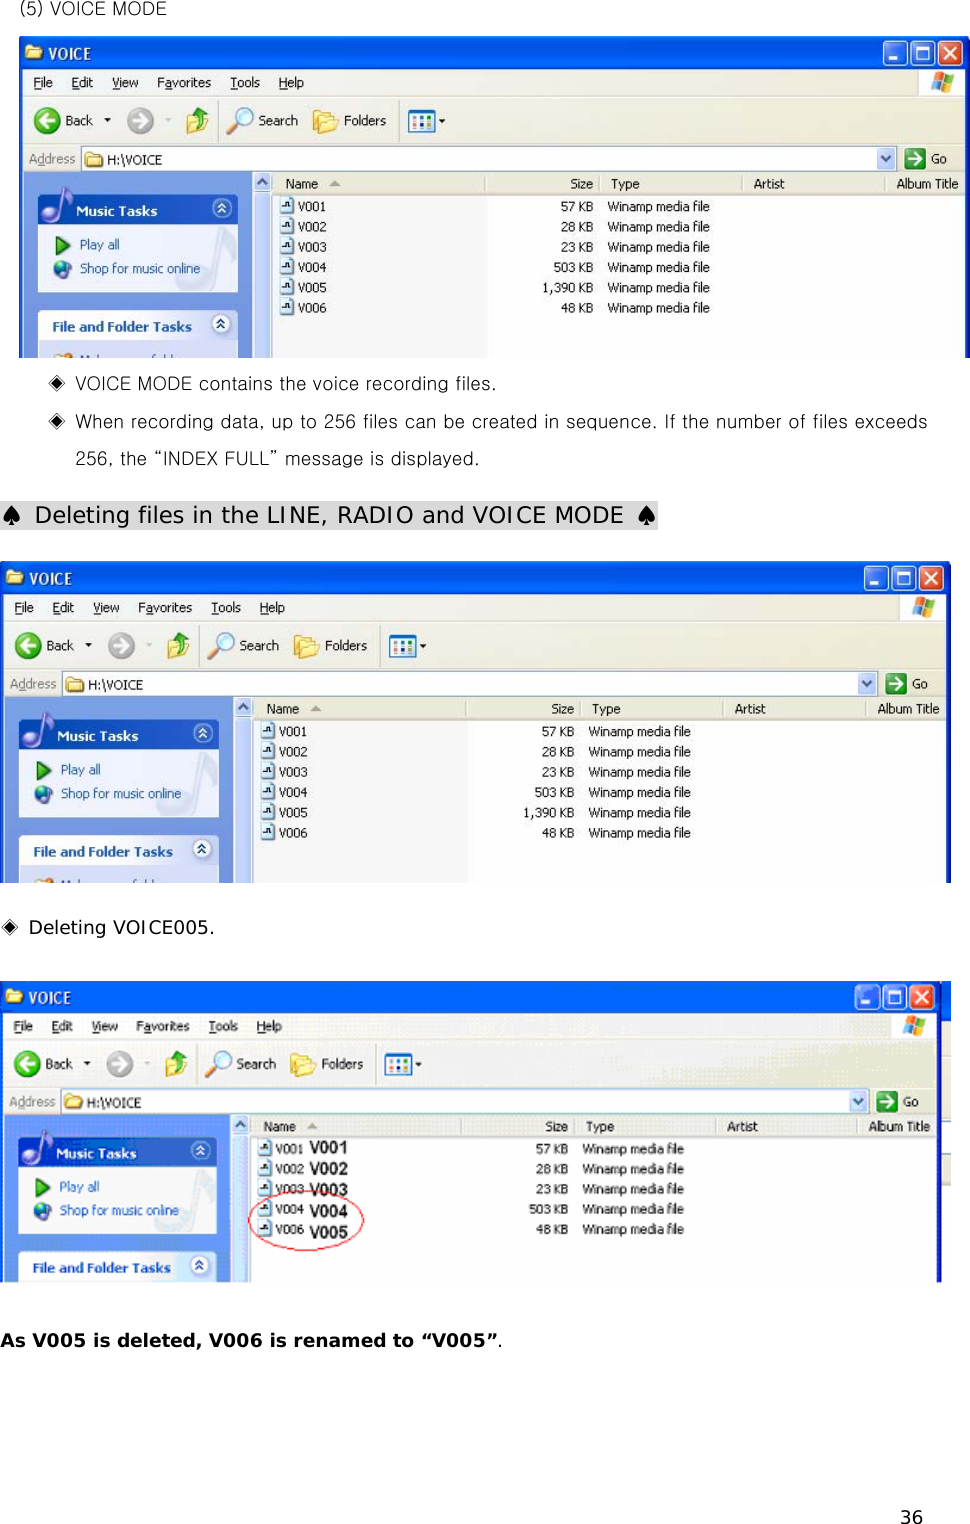 36 (5) VOICE MODE ◈  VOICE MODE contains the voice recording files.   ◈  When recording data, up to 256 files can be created in sequence. If the number of files exceeds 256, the “INDEX FULL” message is displayed. ♠ Deleting files in the LINE, RADIO and VOICE MODE ♠  ◈ Deleting VOICE005.    As V005 is deleted, V006 is renamed to “V005”.  